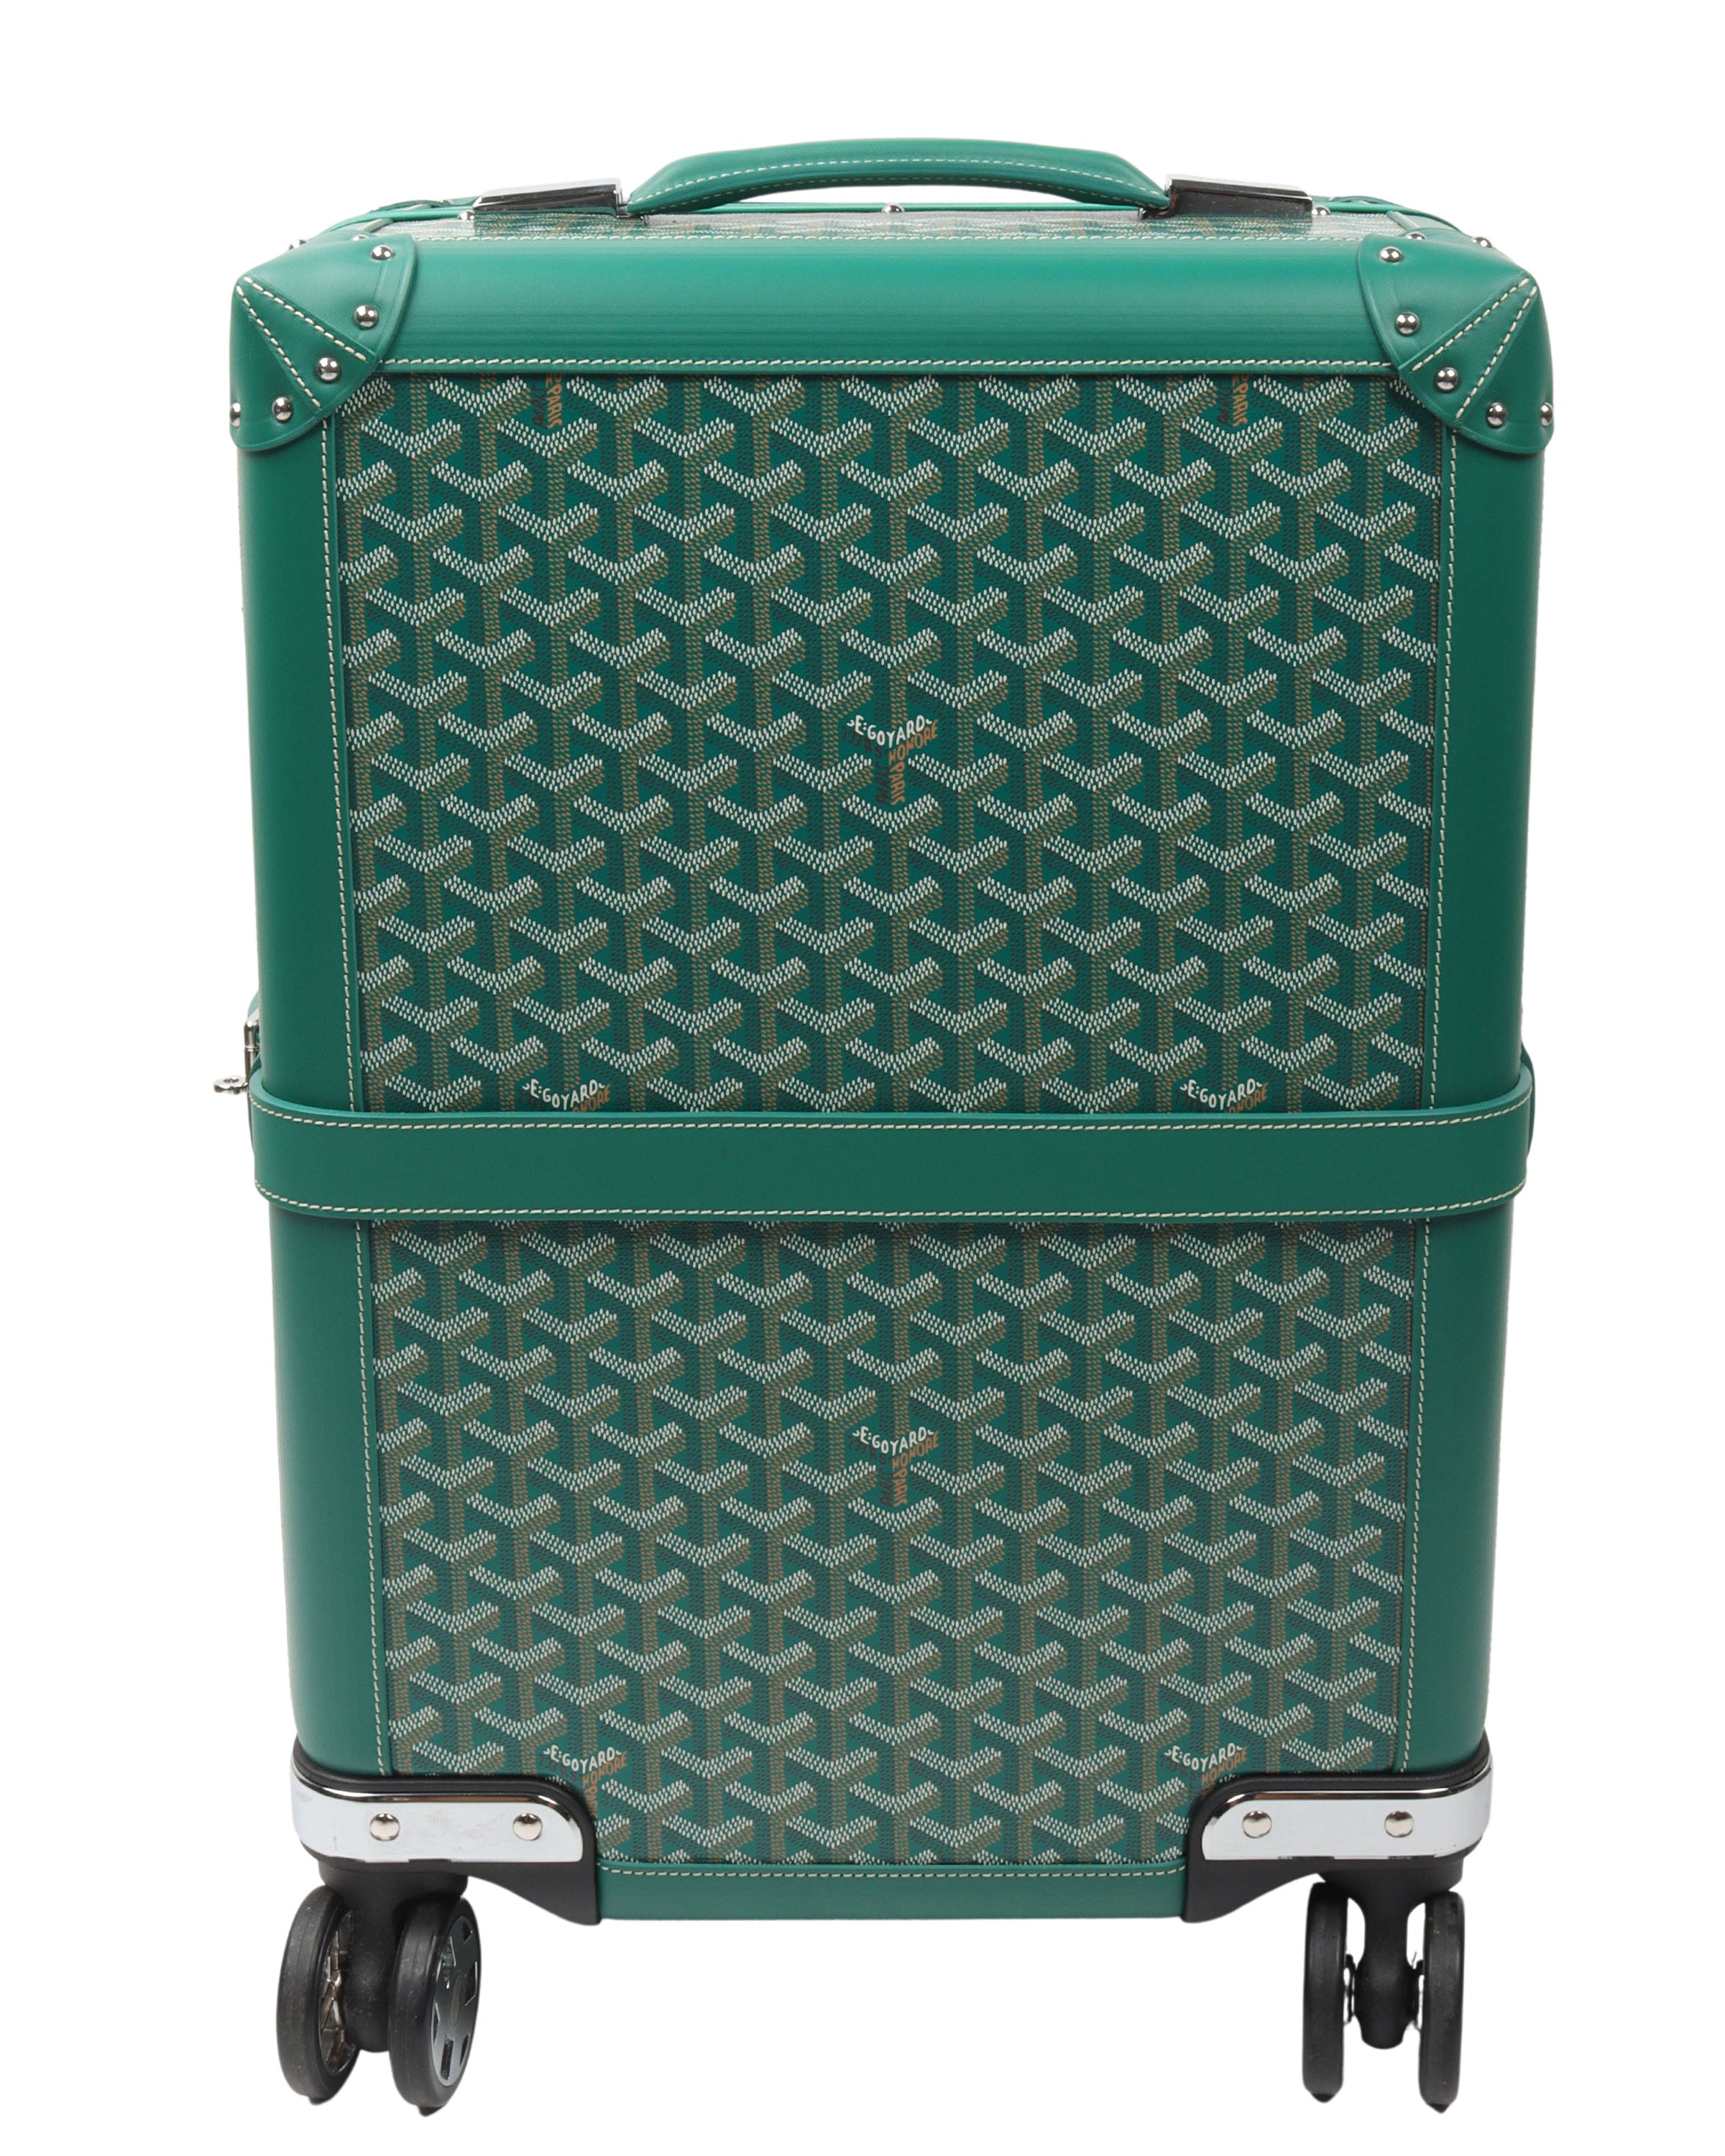 Goyard Bourget PM Carry-On Suitcase